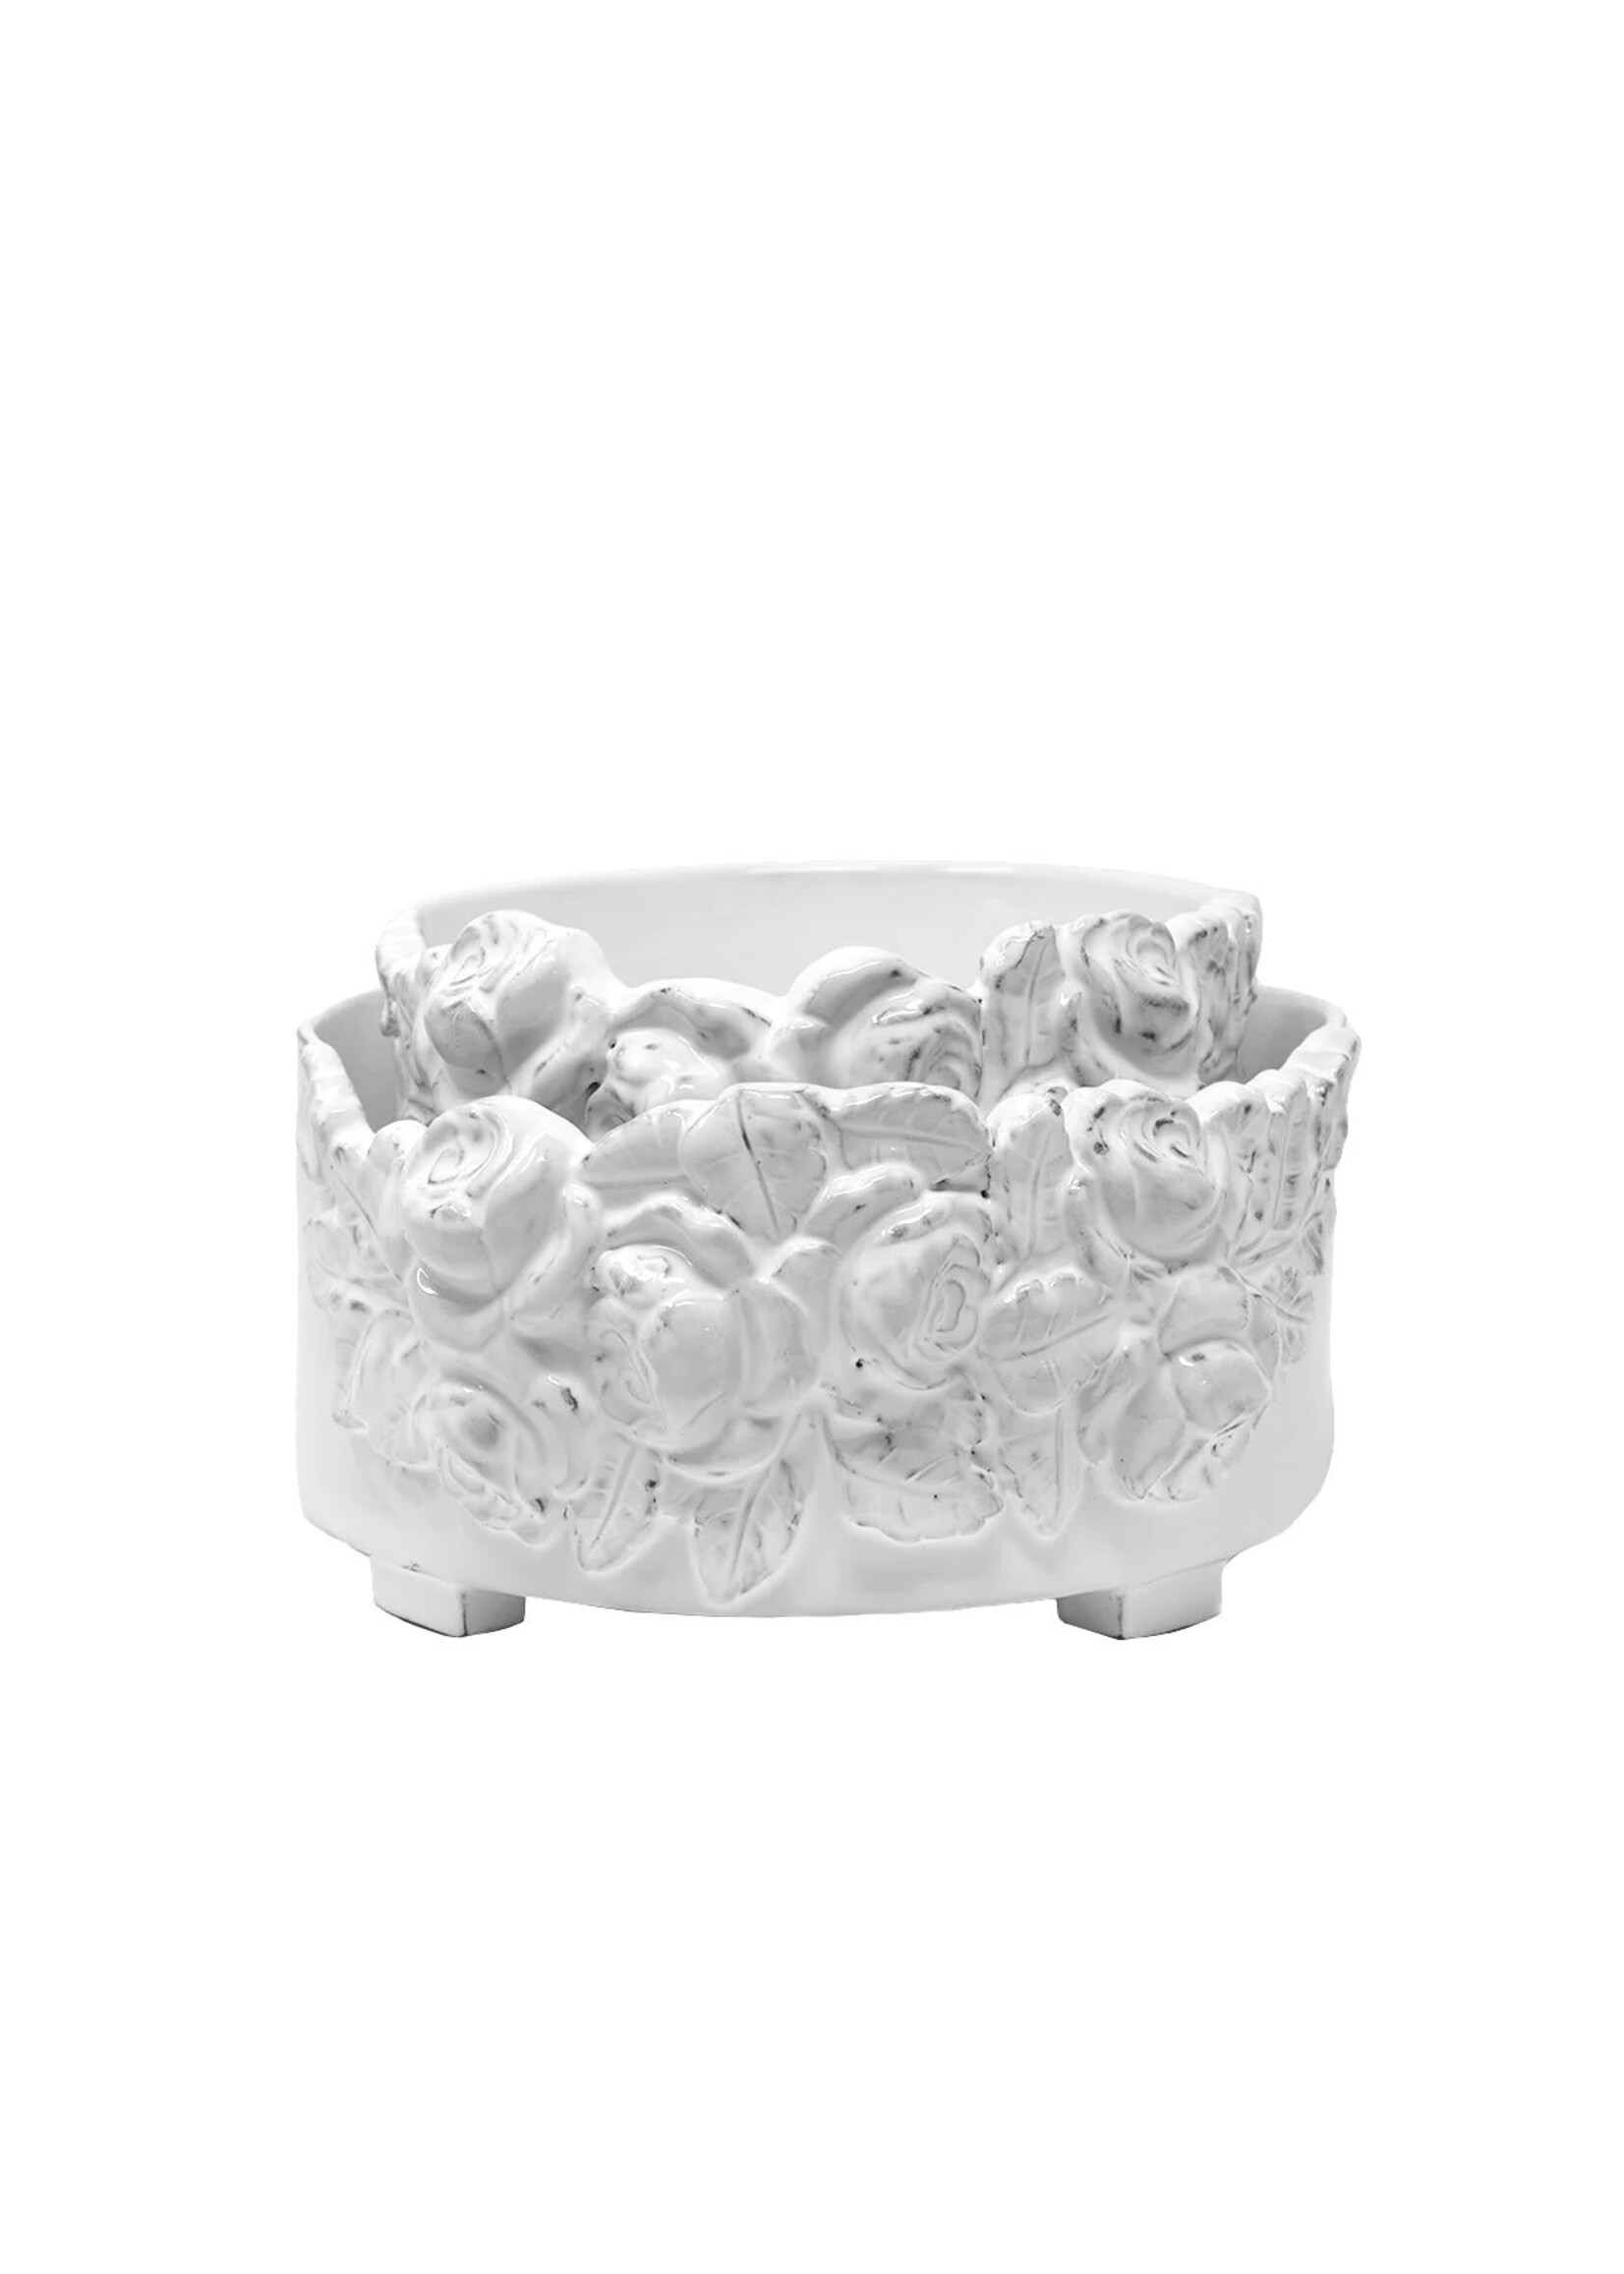 Carron Rose Bowl - Small by Carron